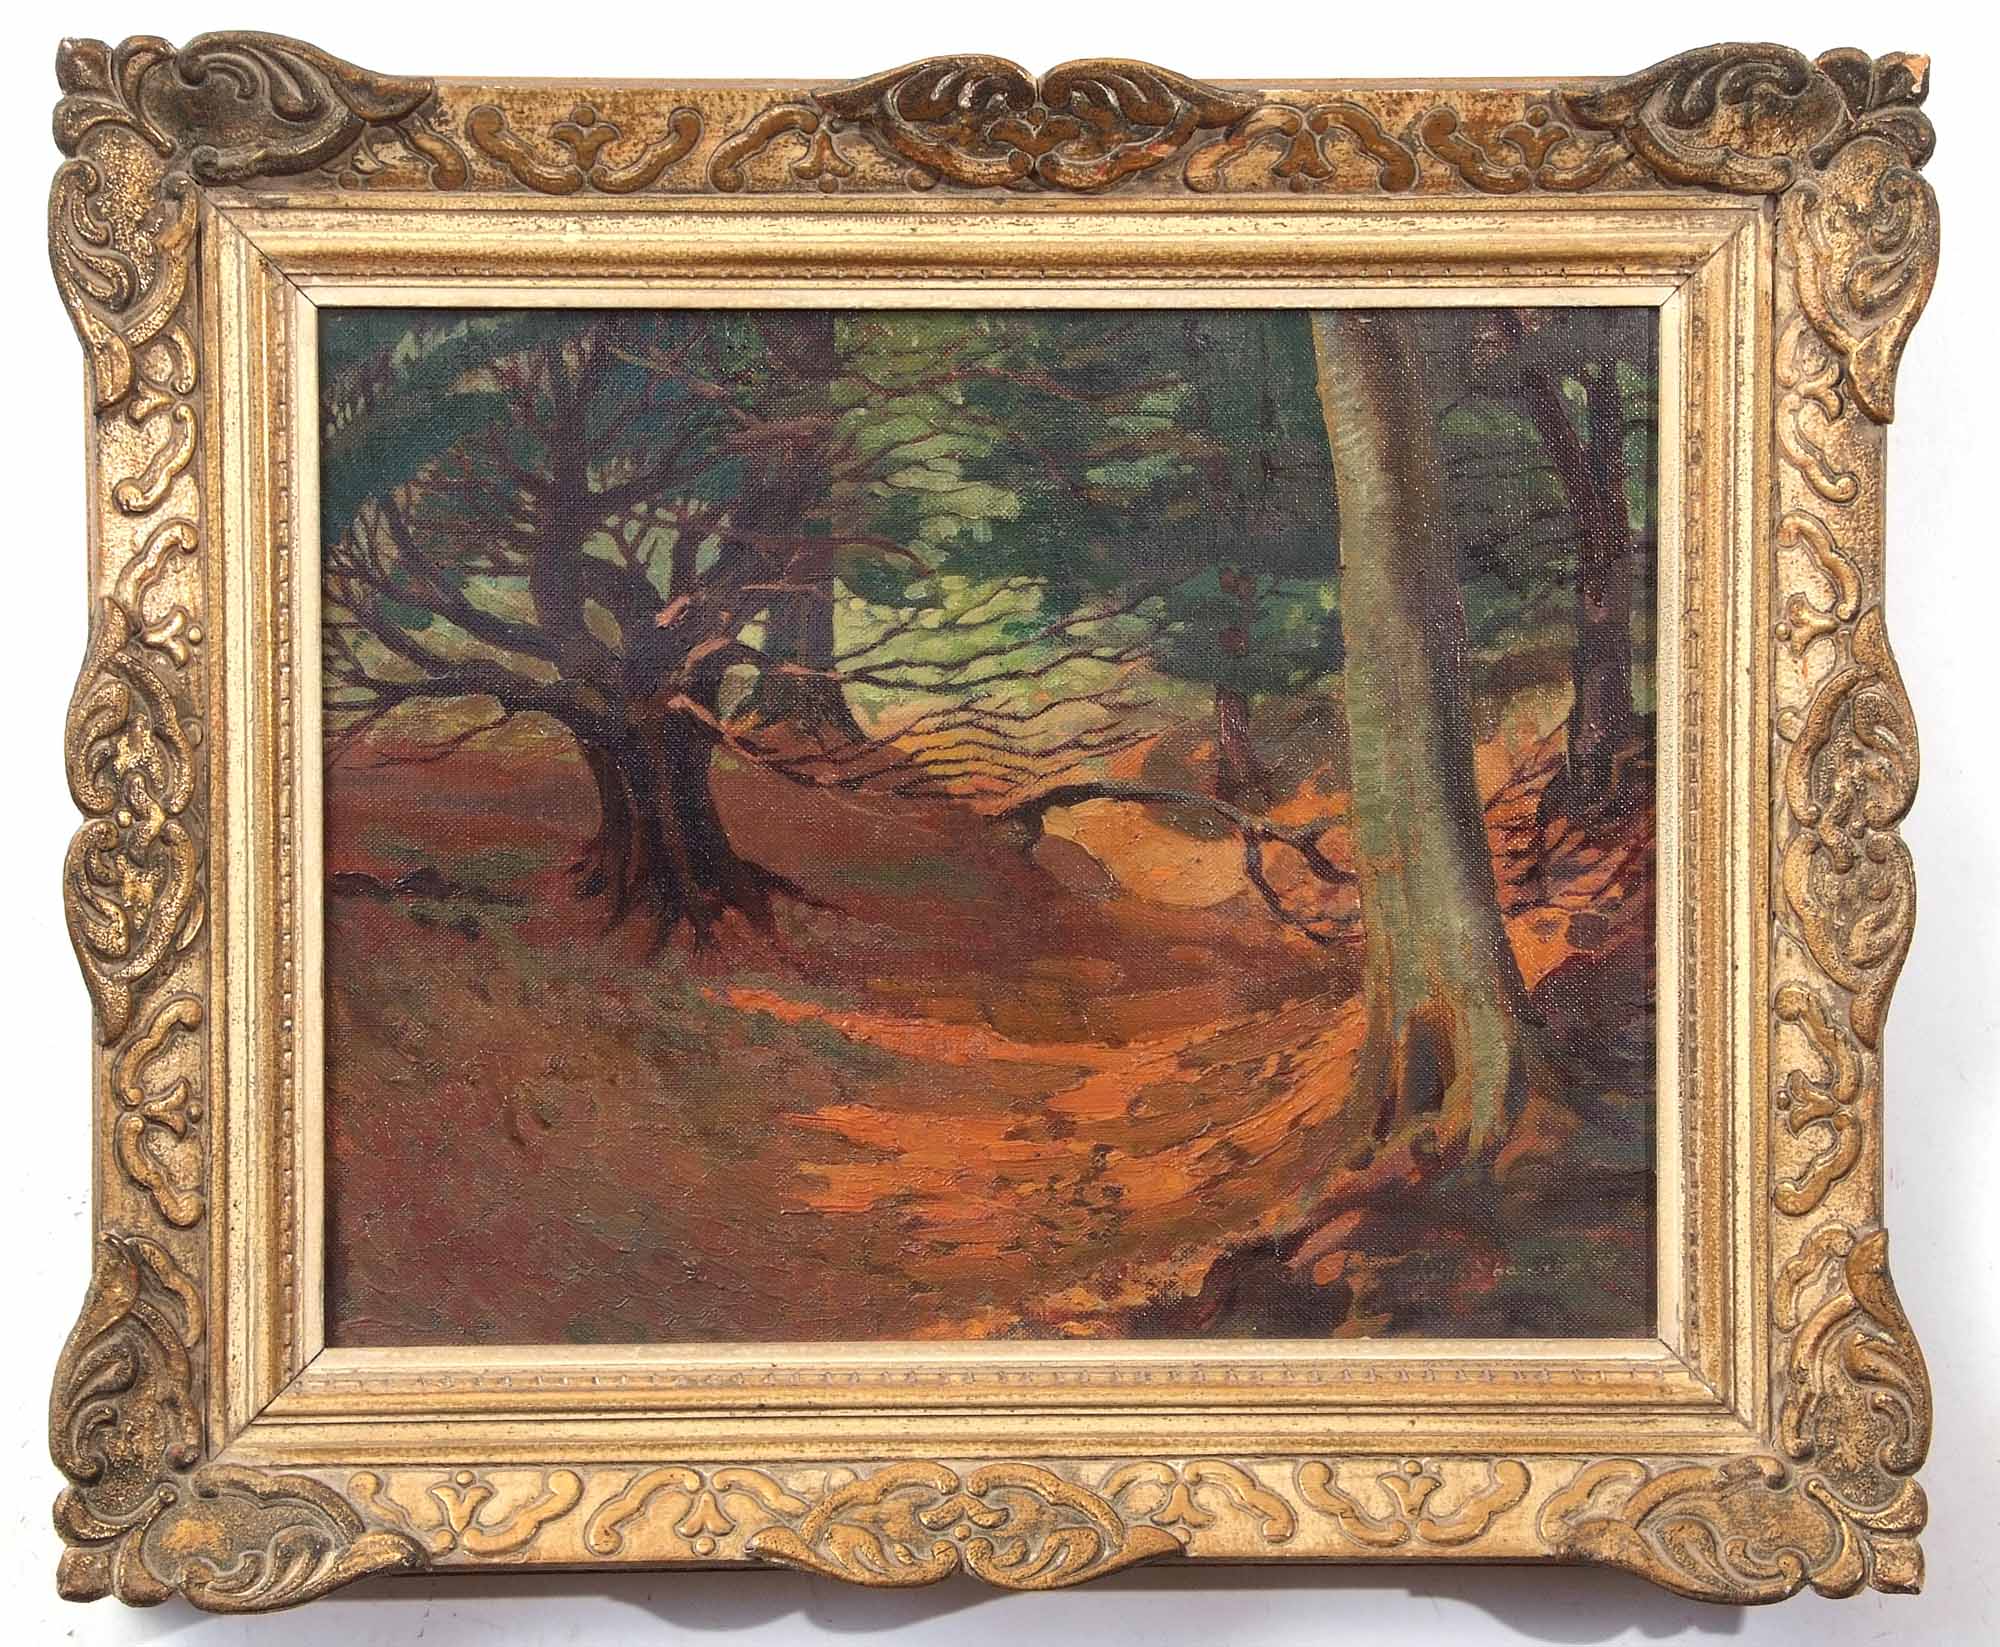 AR Keith Shackleton, MBE, RSMA (1923-2015) Wooded landscape oil on canvas, signed and dated 55